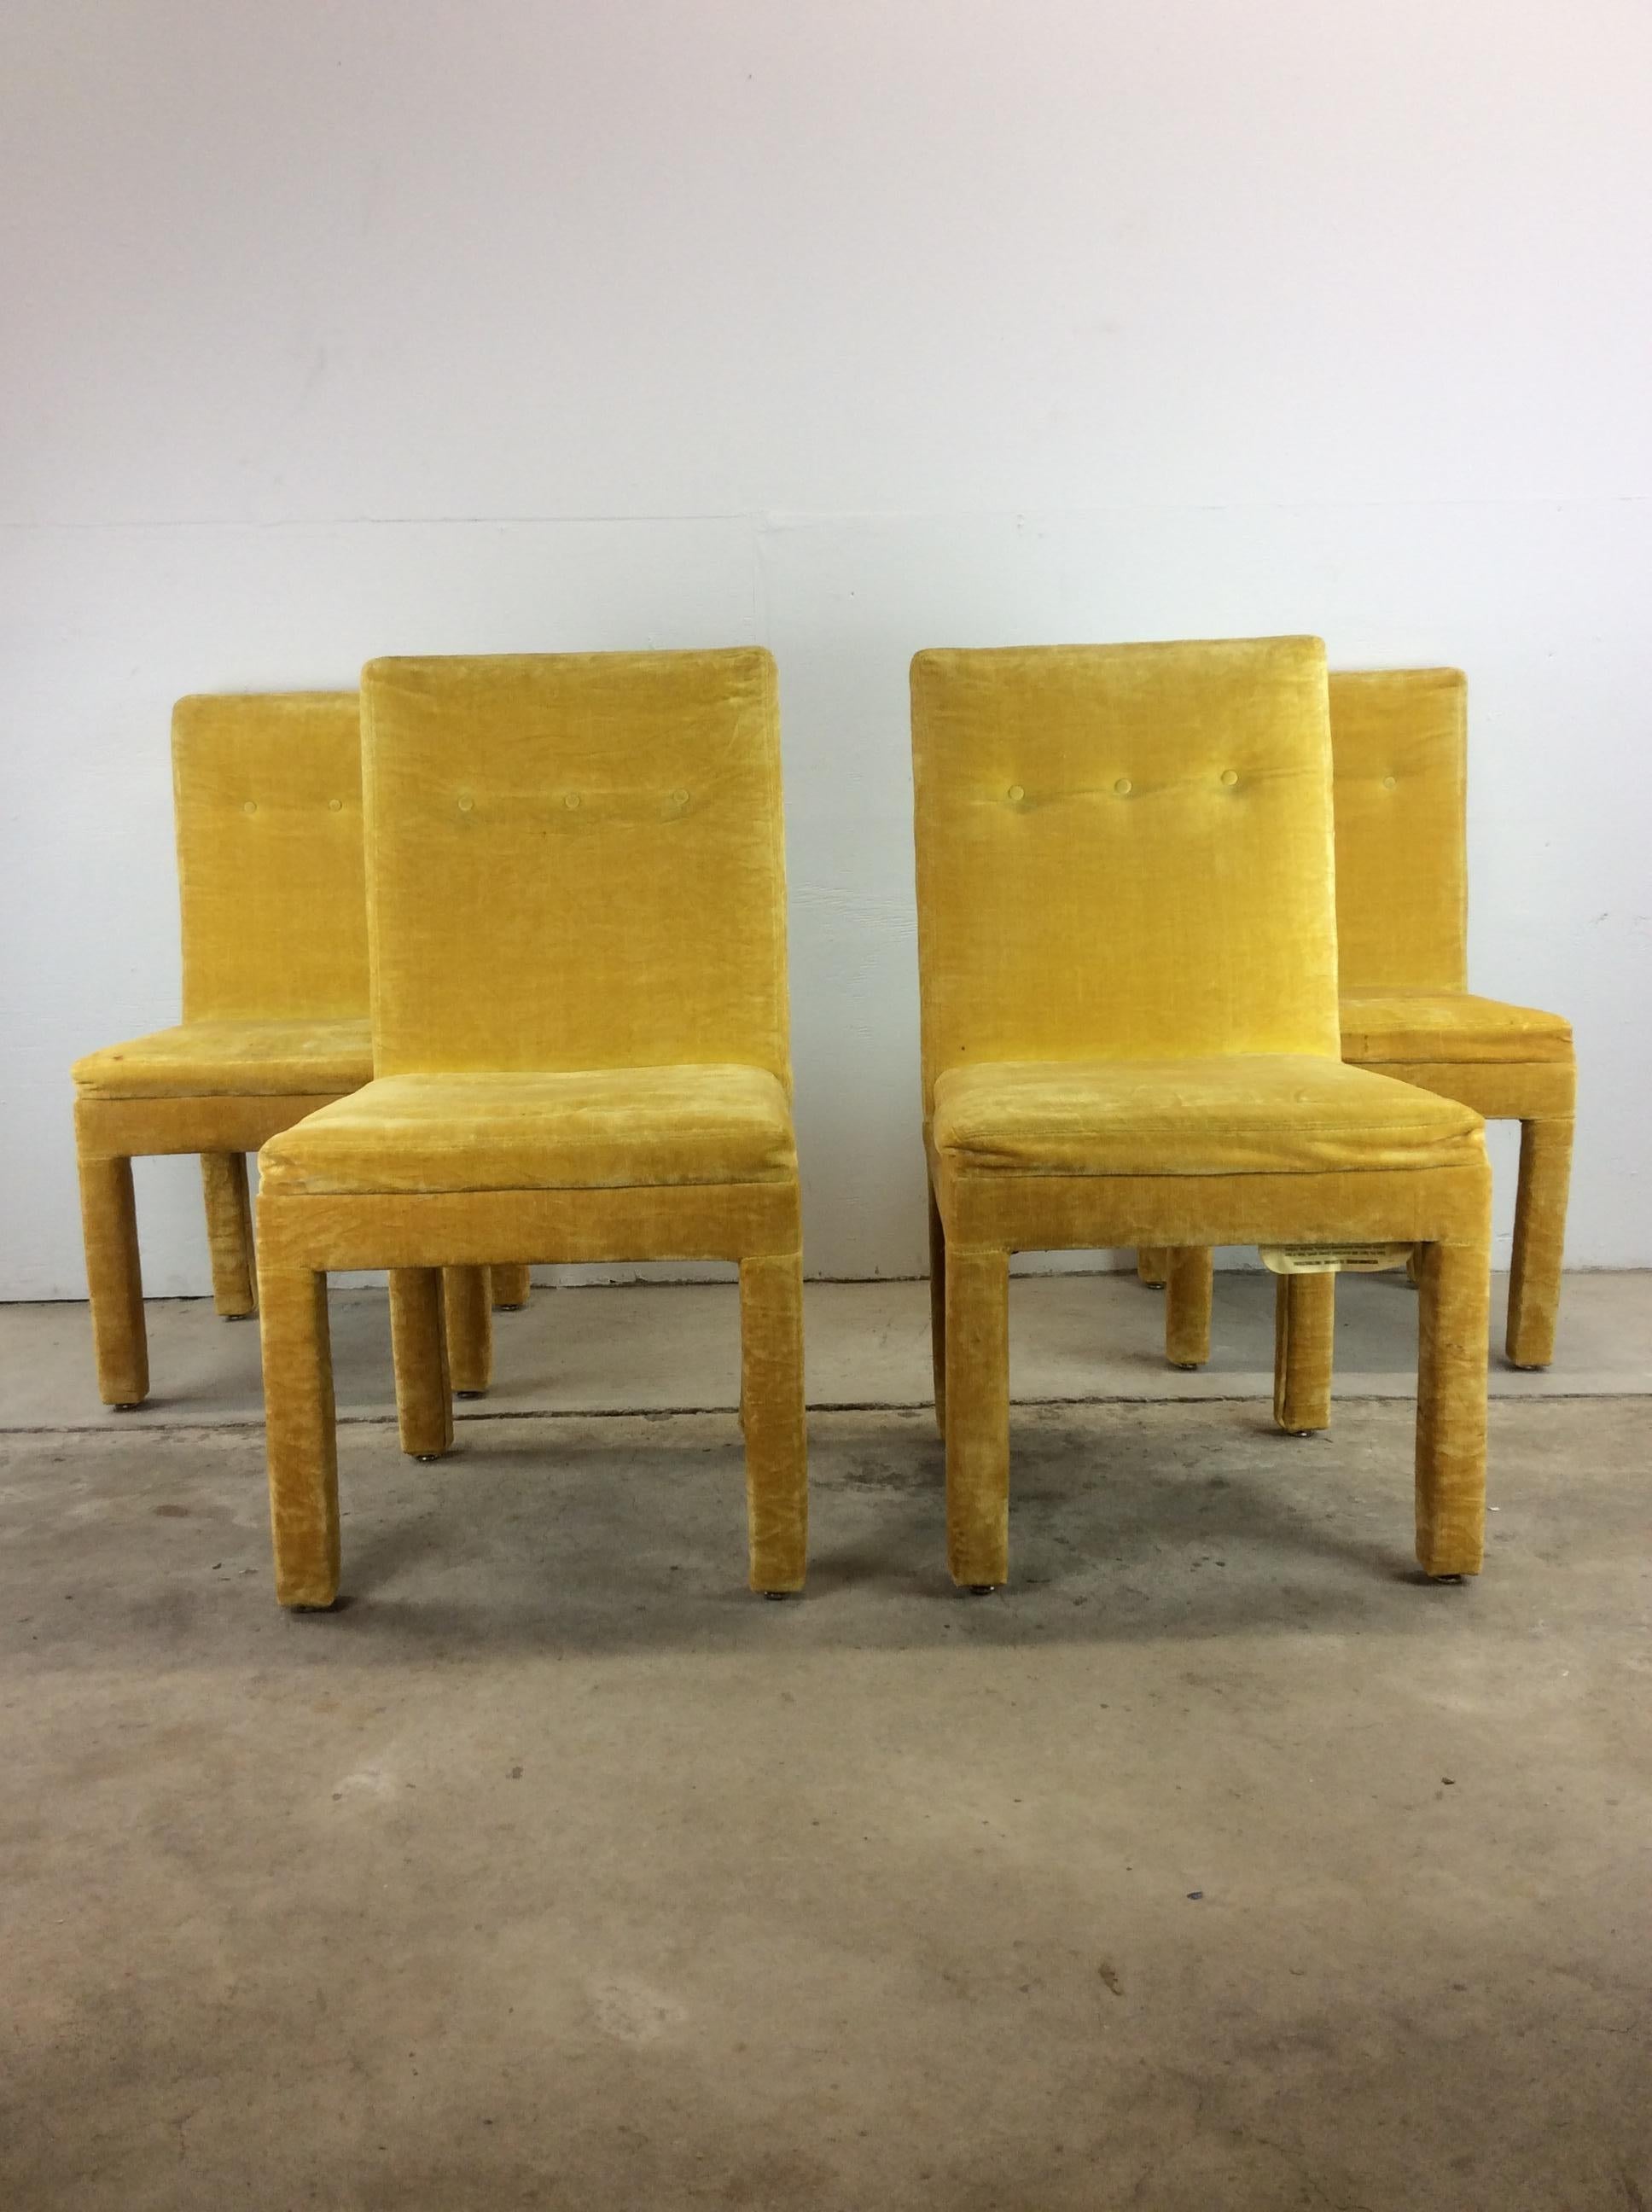 This set of 4 postmodern dining chairs feature vintage yellow velour upholstery throughout, tufted seat backs and Parson's style design.

Complimentary glass & chrome dining table available separately. 

Dimensions: 20.5w 22d 38h 19sh

Condition: